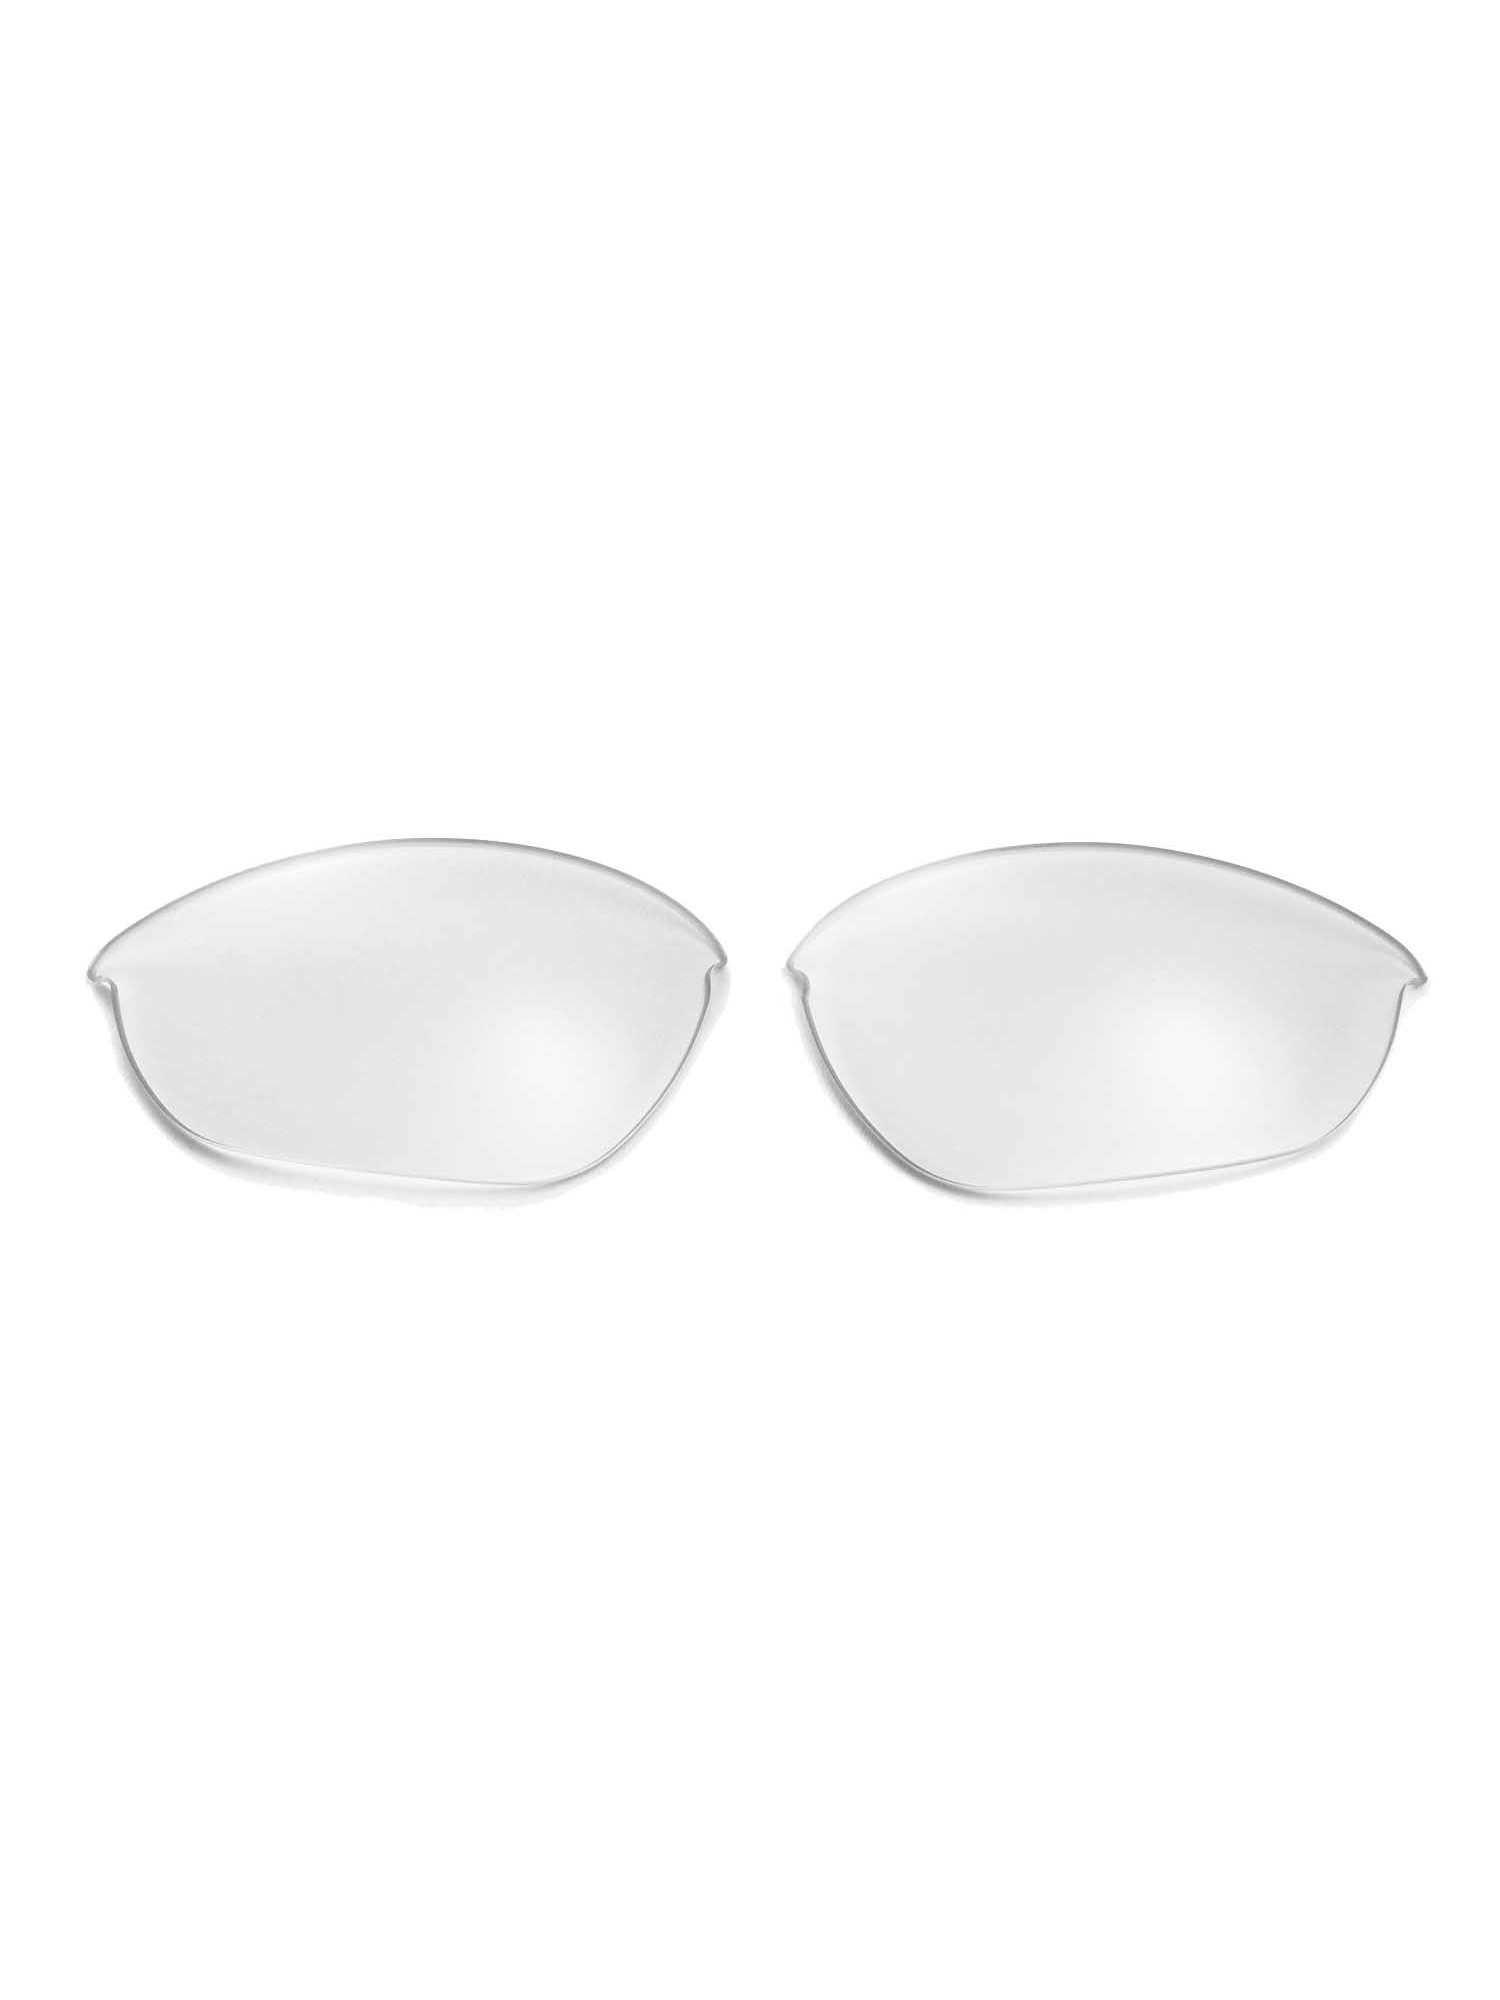 Walleva Clear Replacement Lenses for Oakley Half Jacket Sunglasses - image 3 of 7